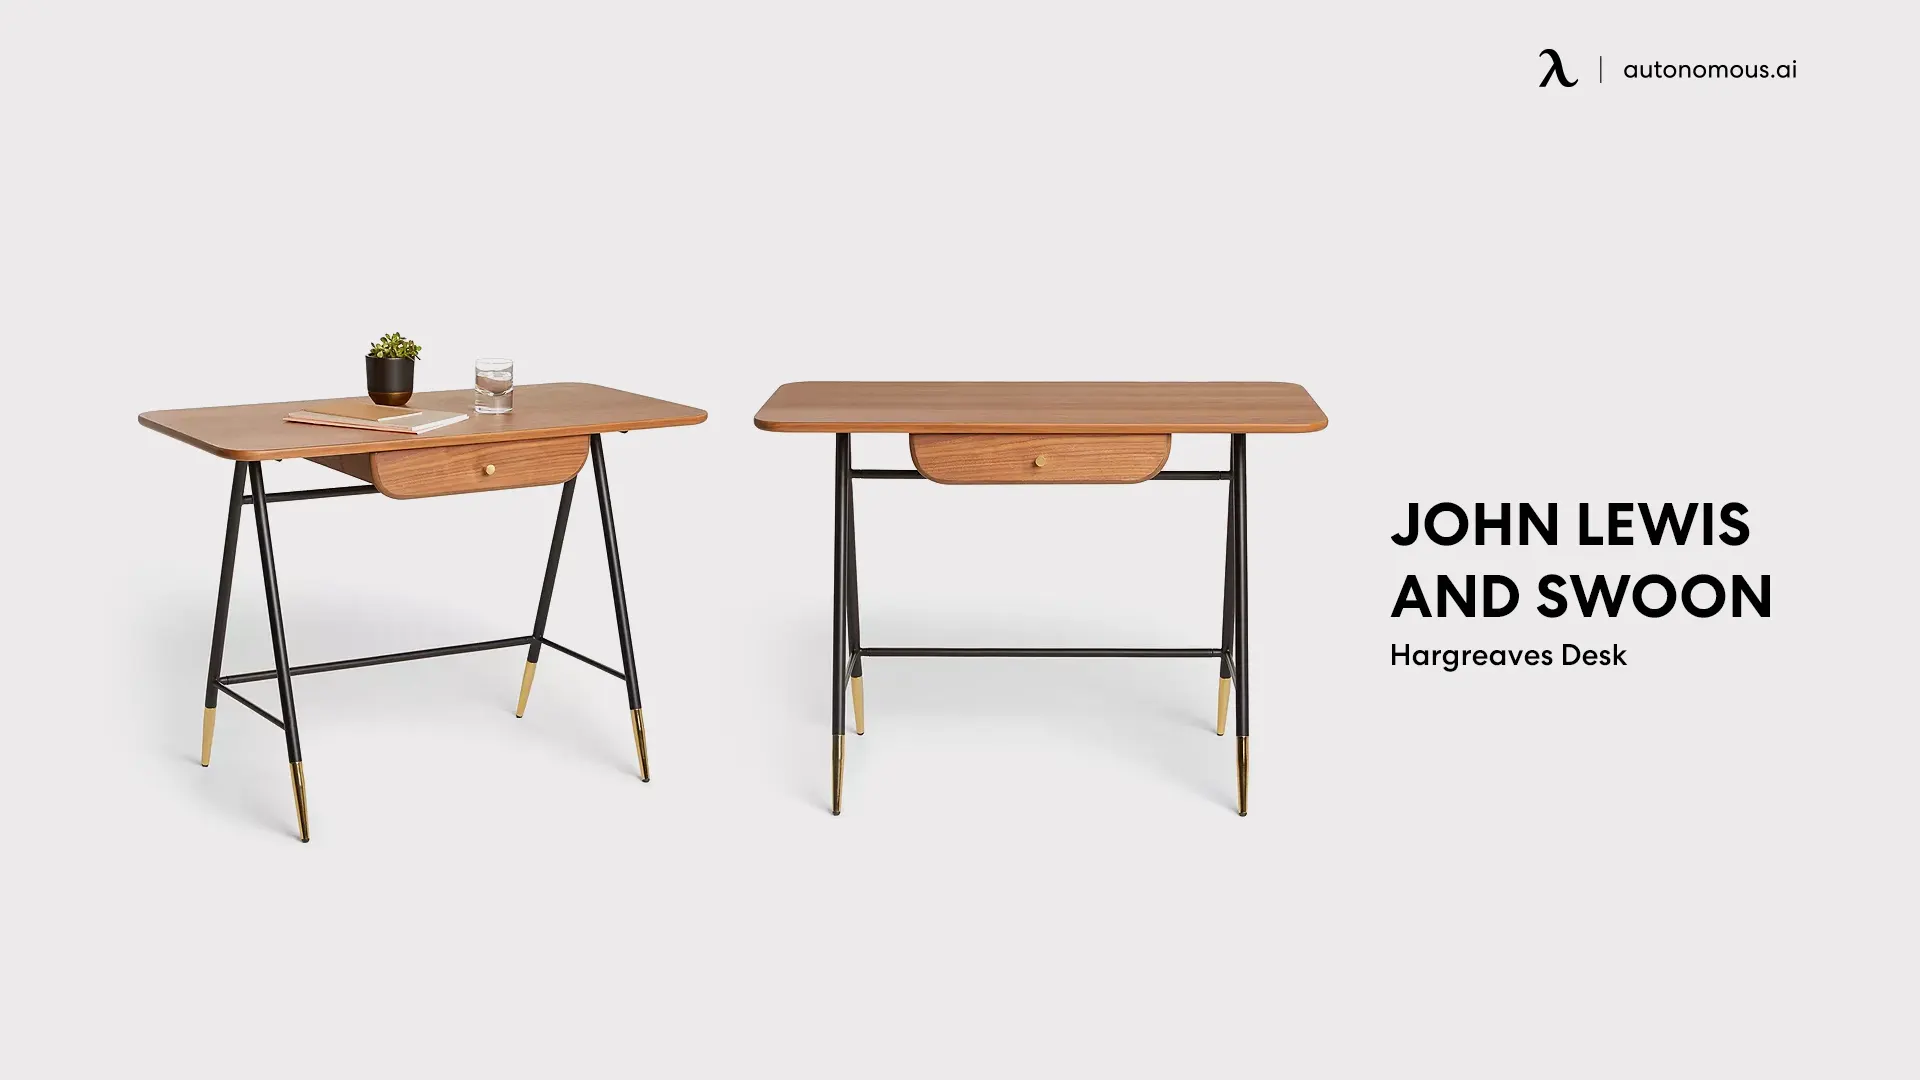 John Lewis and Swoon's Hargreaves Desk